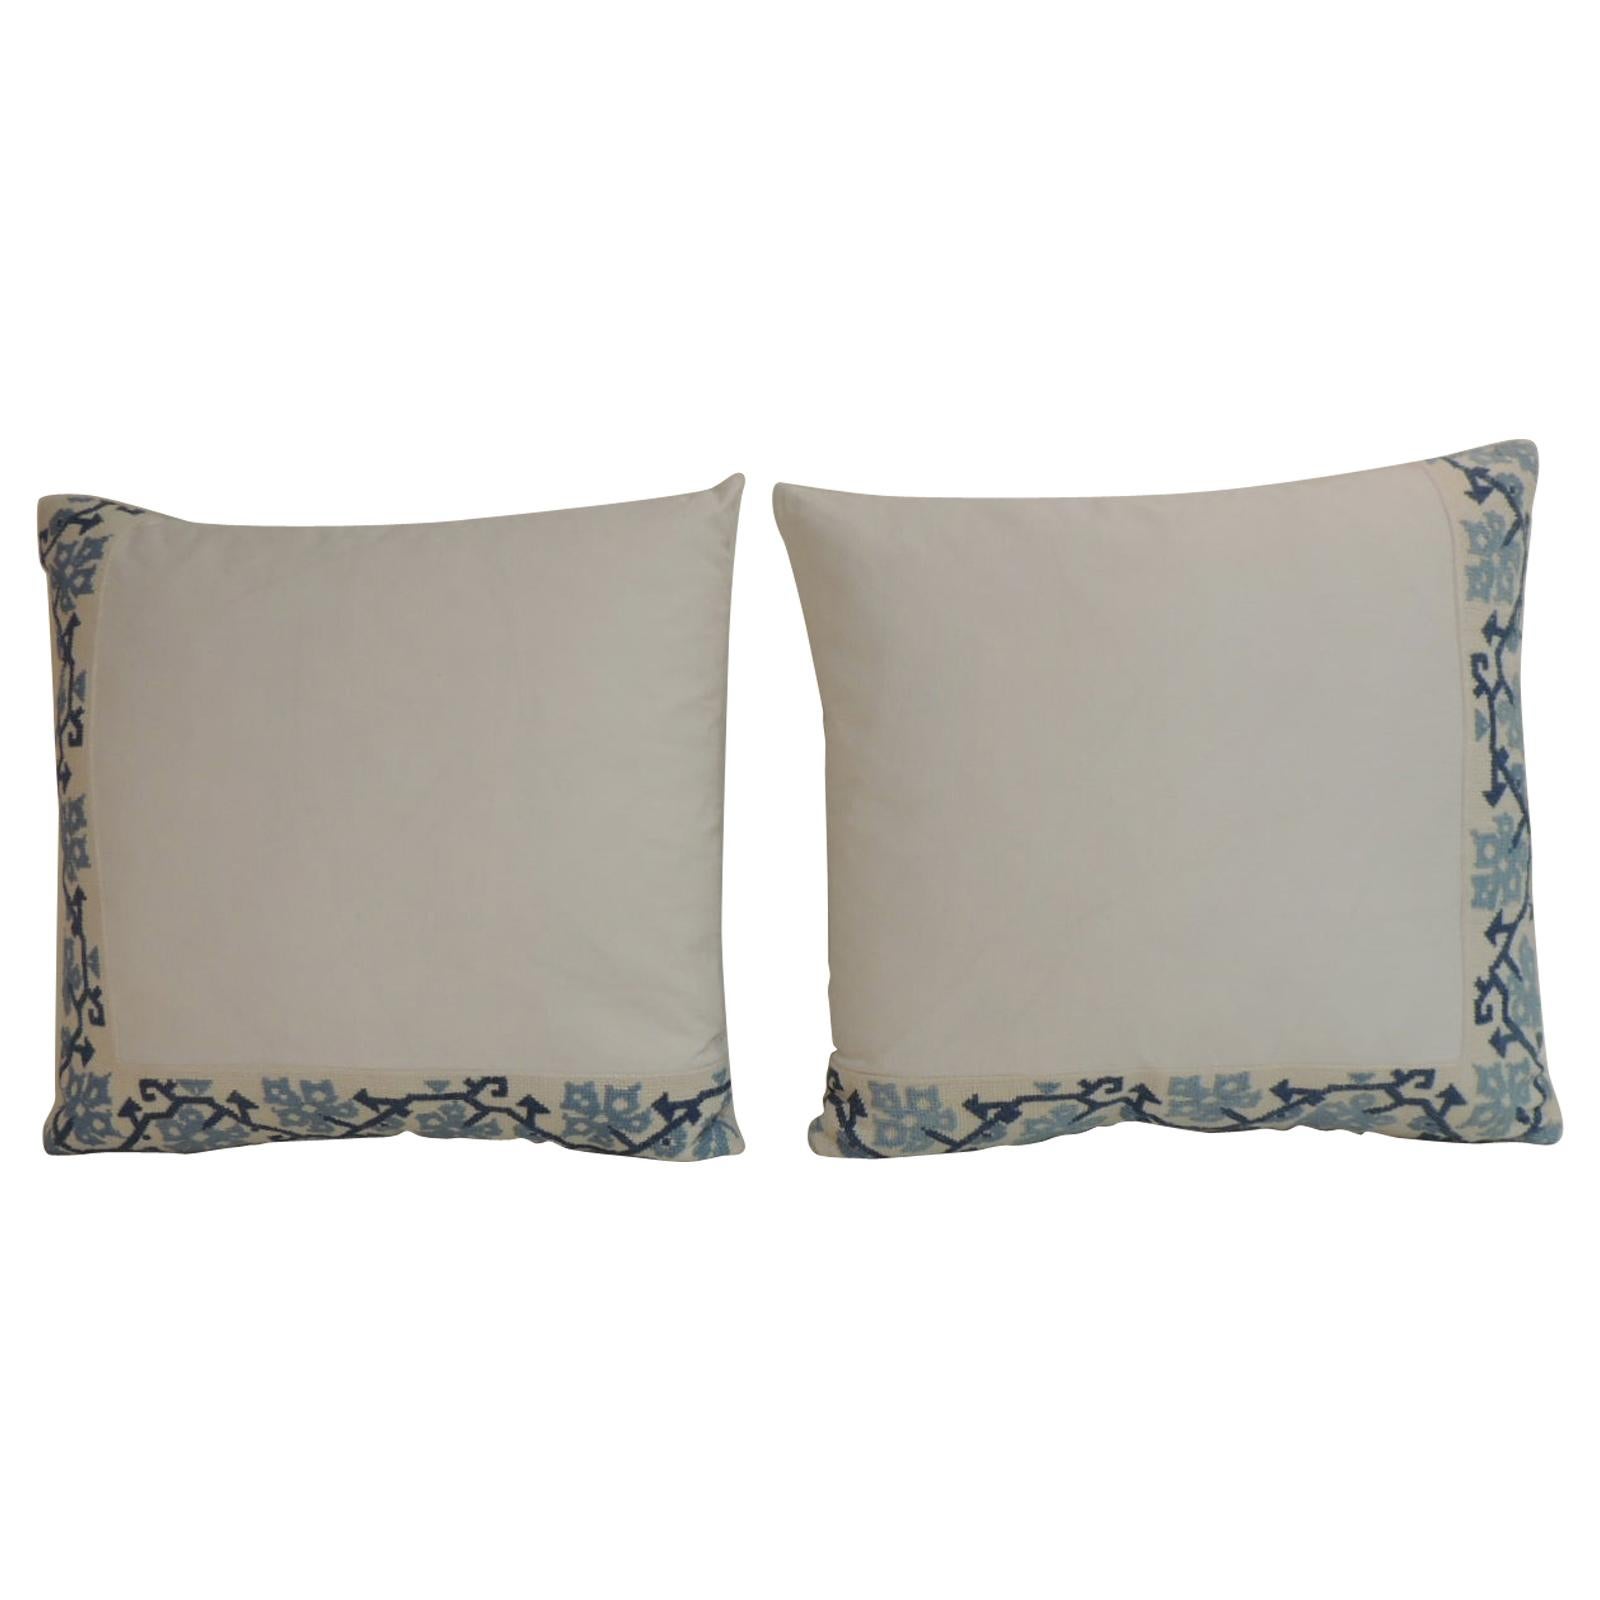 Blue and White Greek Isle Embroidered Decorative Pillows For Sale